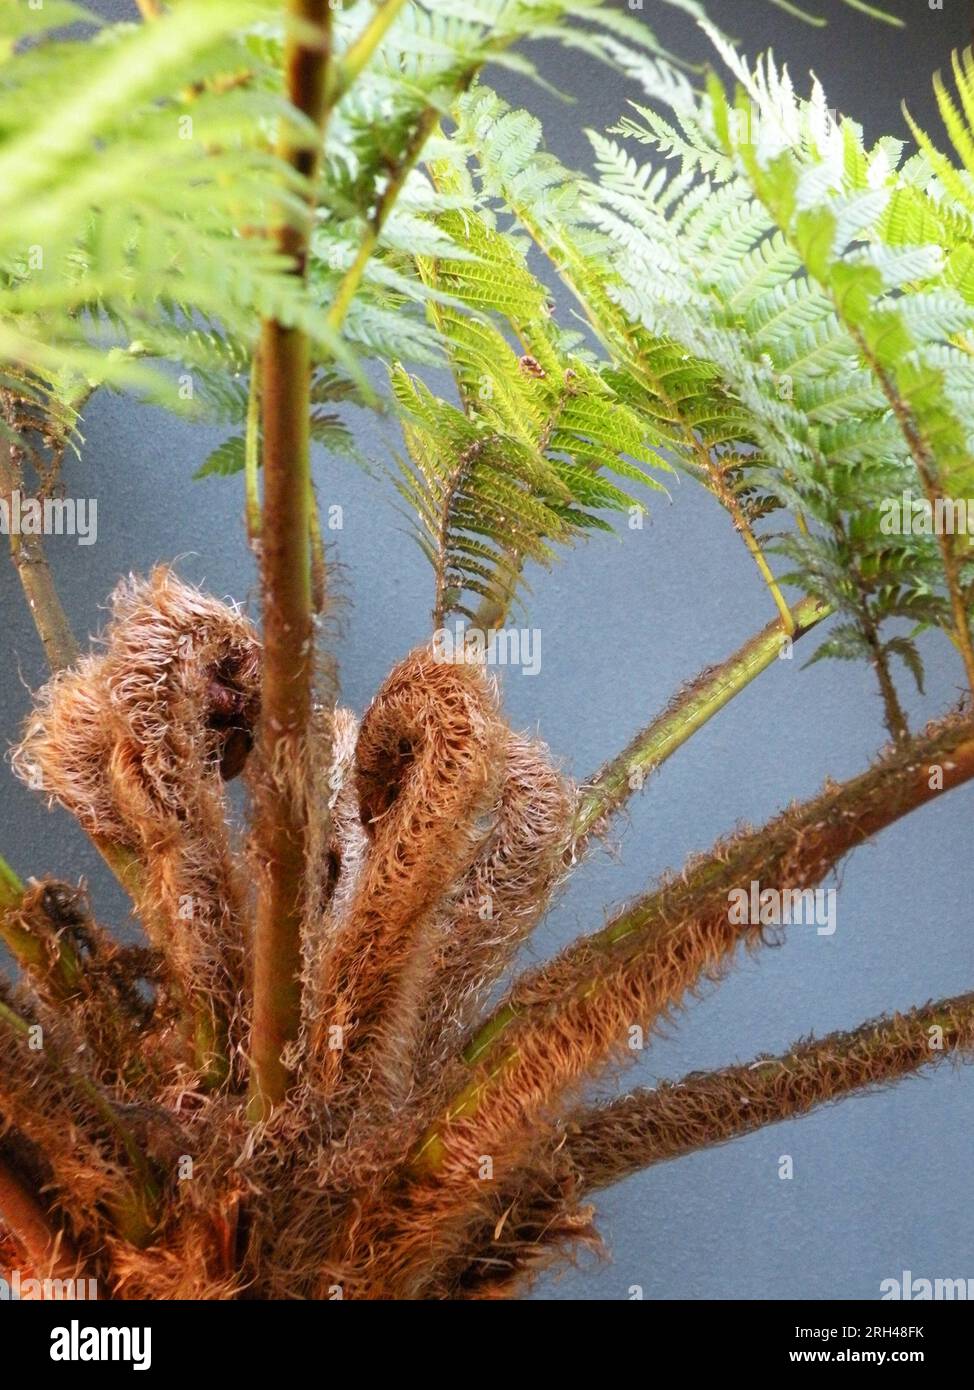 Spiral and hairy fern leaves Stock Photo